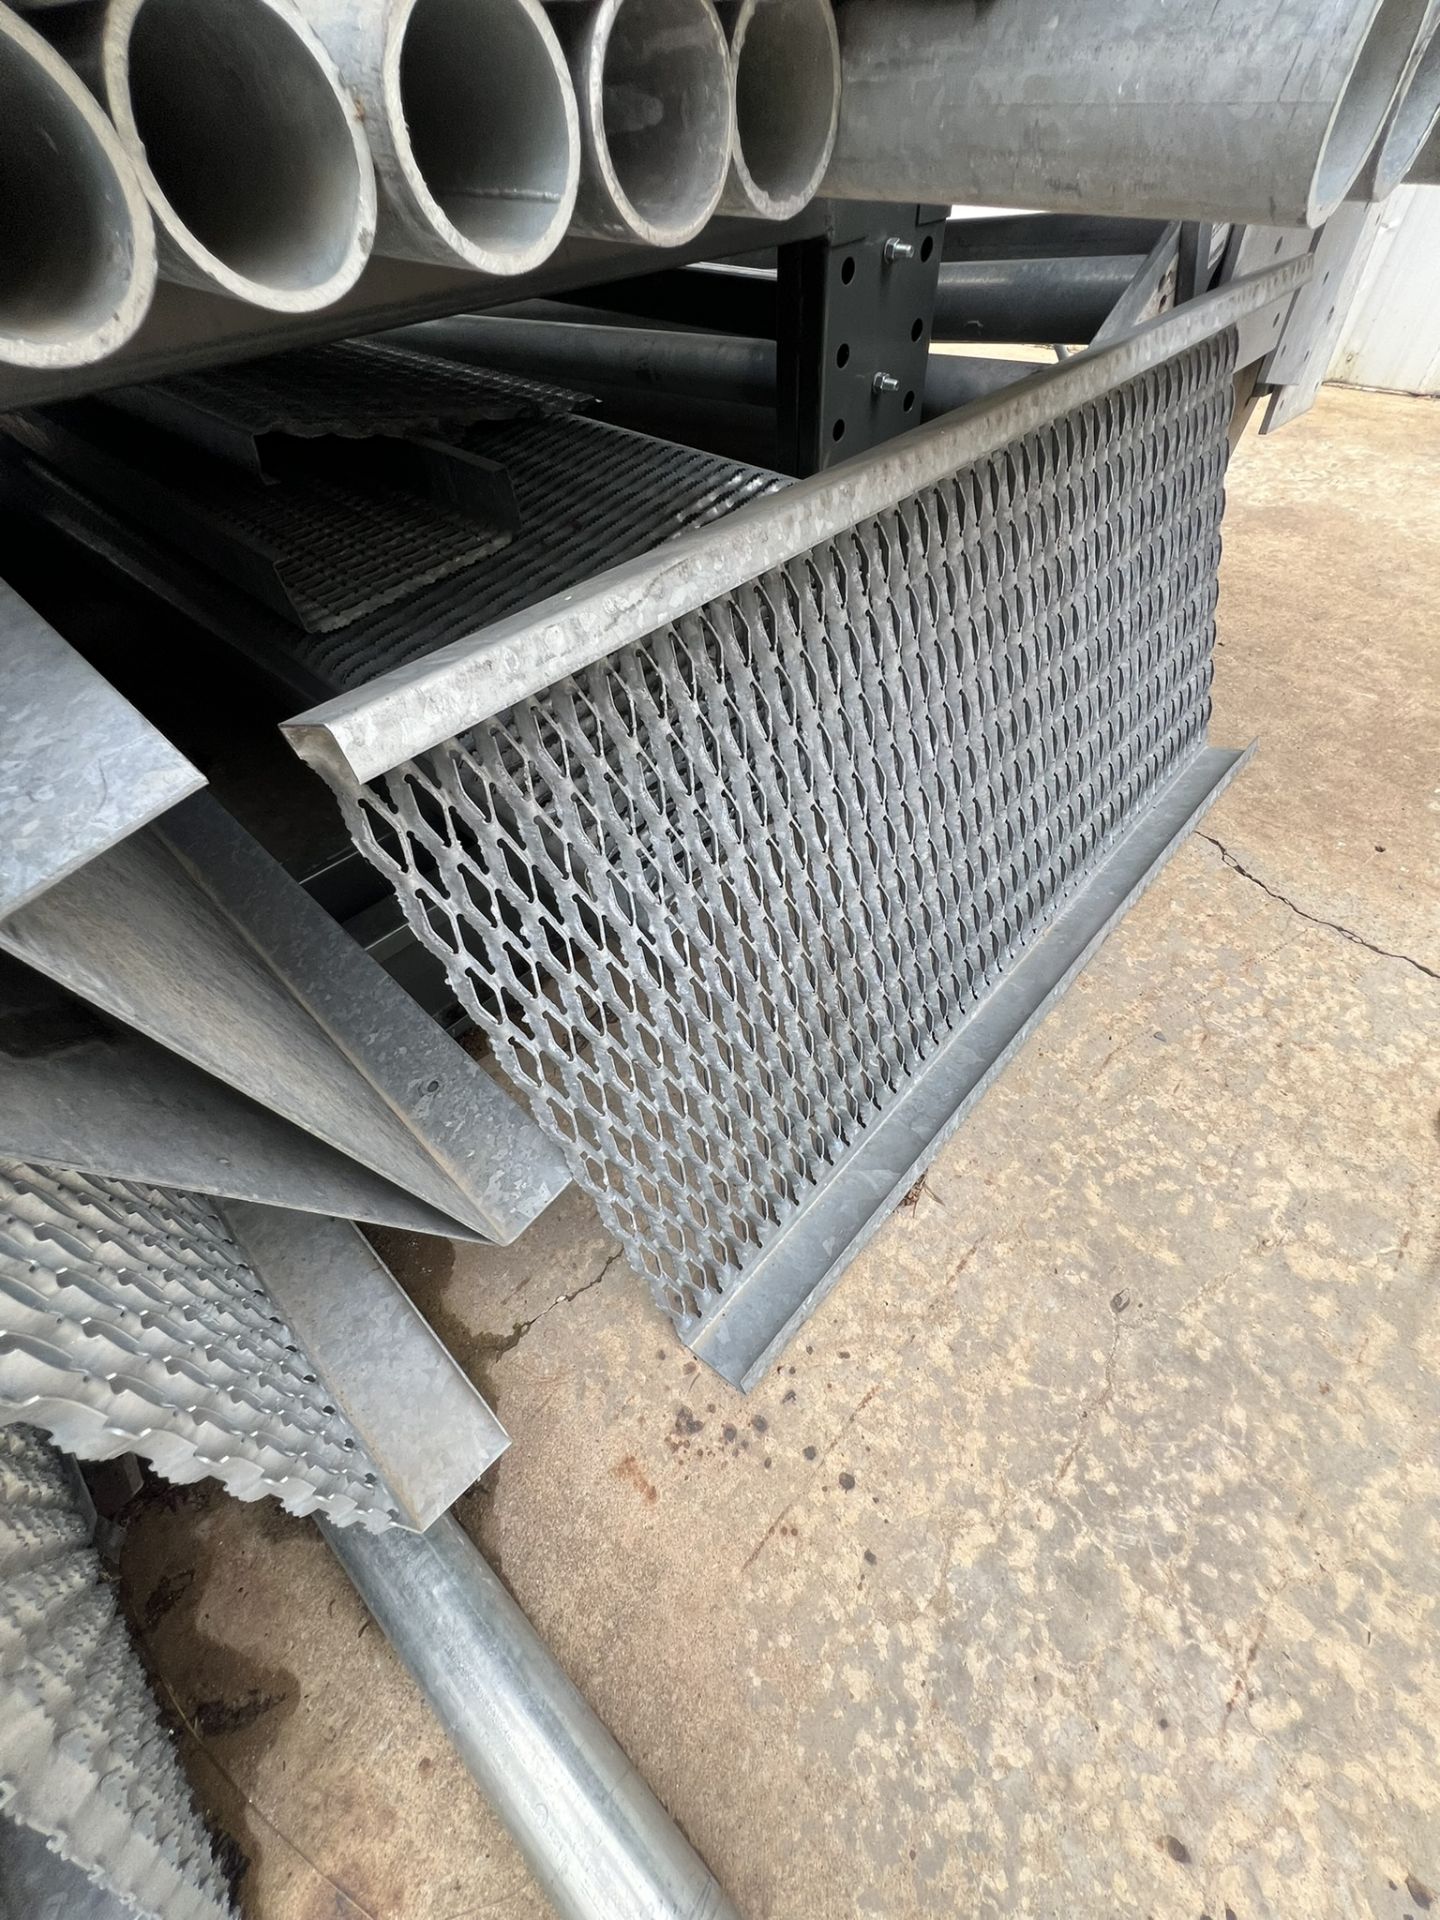 Safety Grate Bridge (8 2ftx10ft sections), legs, other pieces, do not know if it is full set - Image 2 of 3